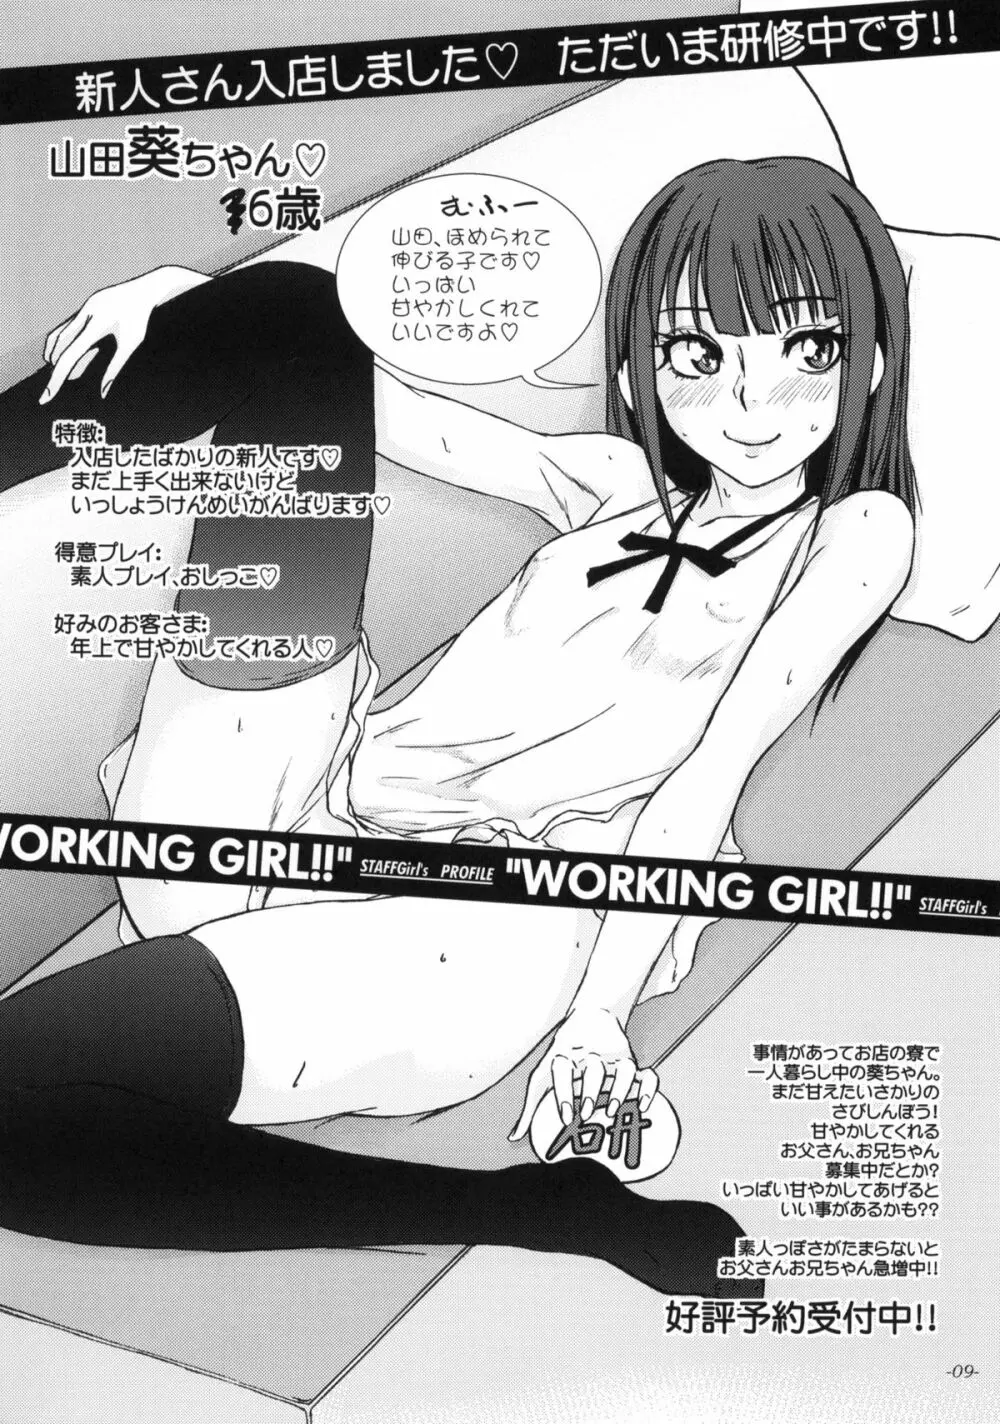 WORKING GIRL!! ranking No 1 風俗嬢 伊波まひる Page.10